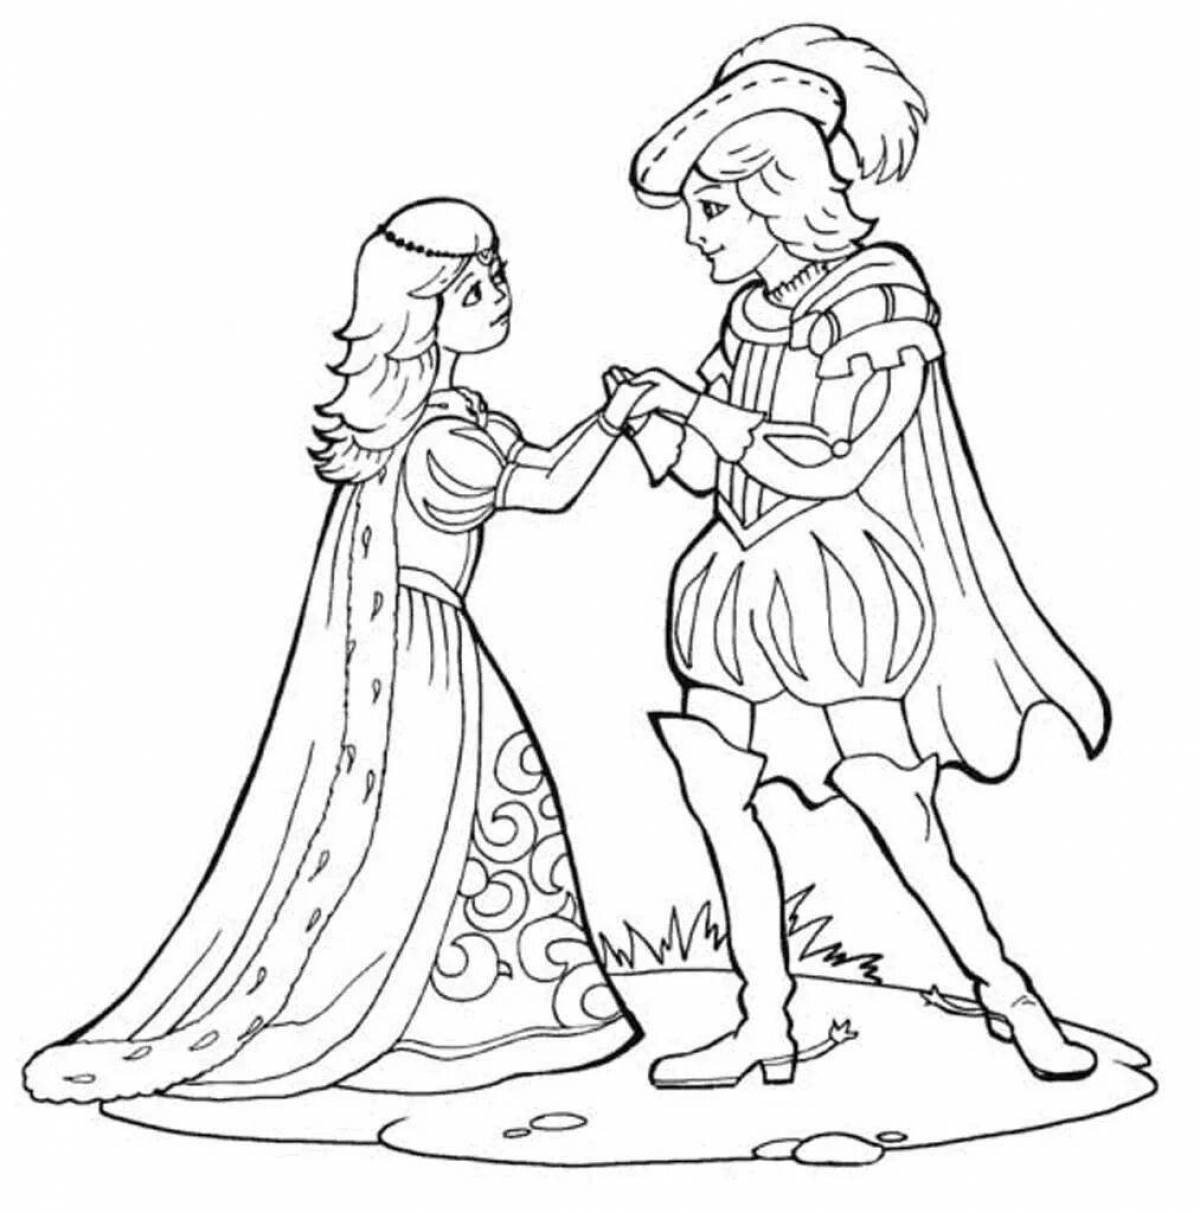 Glowing princess and prince coloring pages for kids